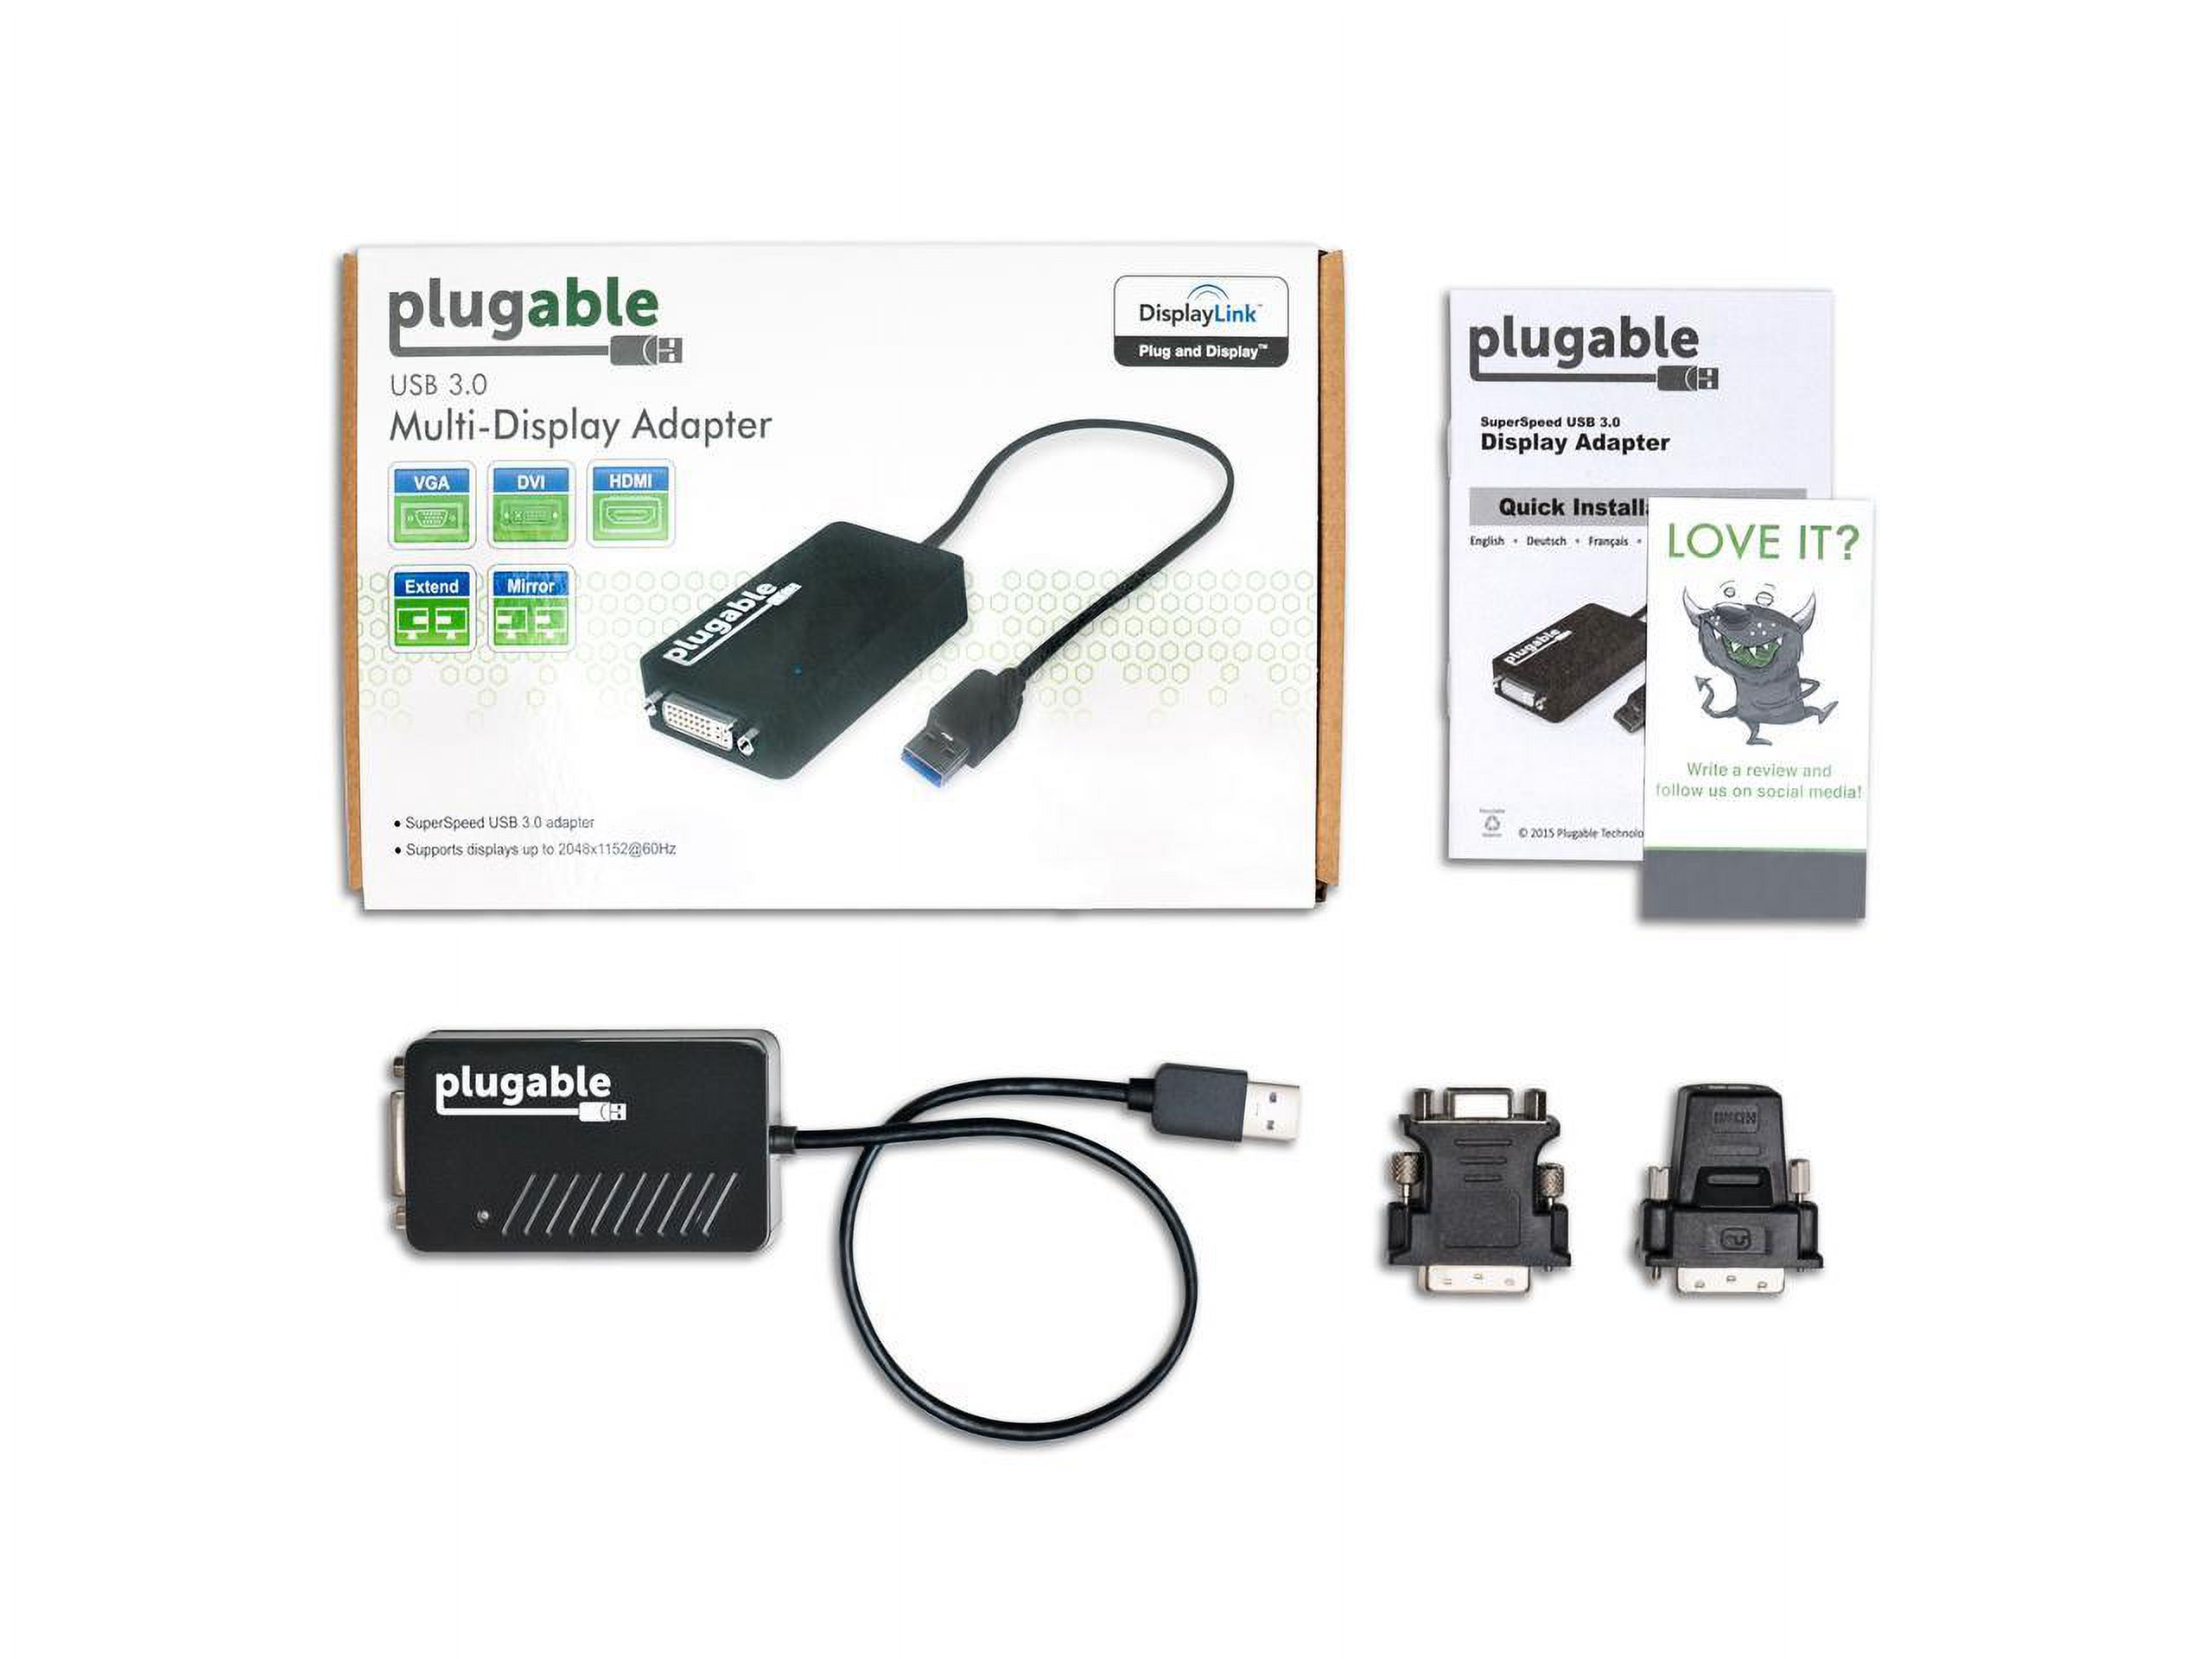 Plugable USB 3.0 to DVI/VGA/HDMI Video Graphics Adapter for Multiple Monitors up to 2048x1152 Supports Windows 11, 10, 8.1, 7, XP, and Mac 10.14+ - image 5 of 8